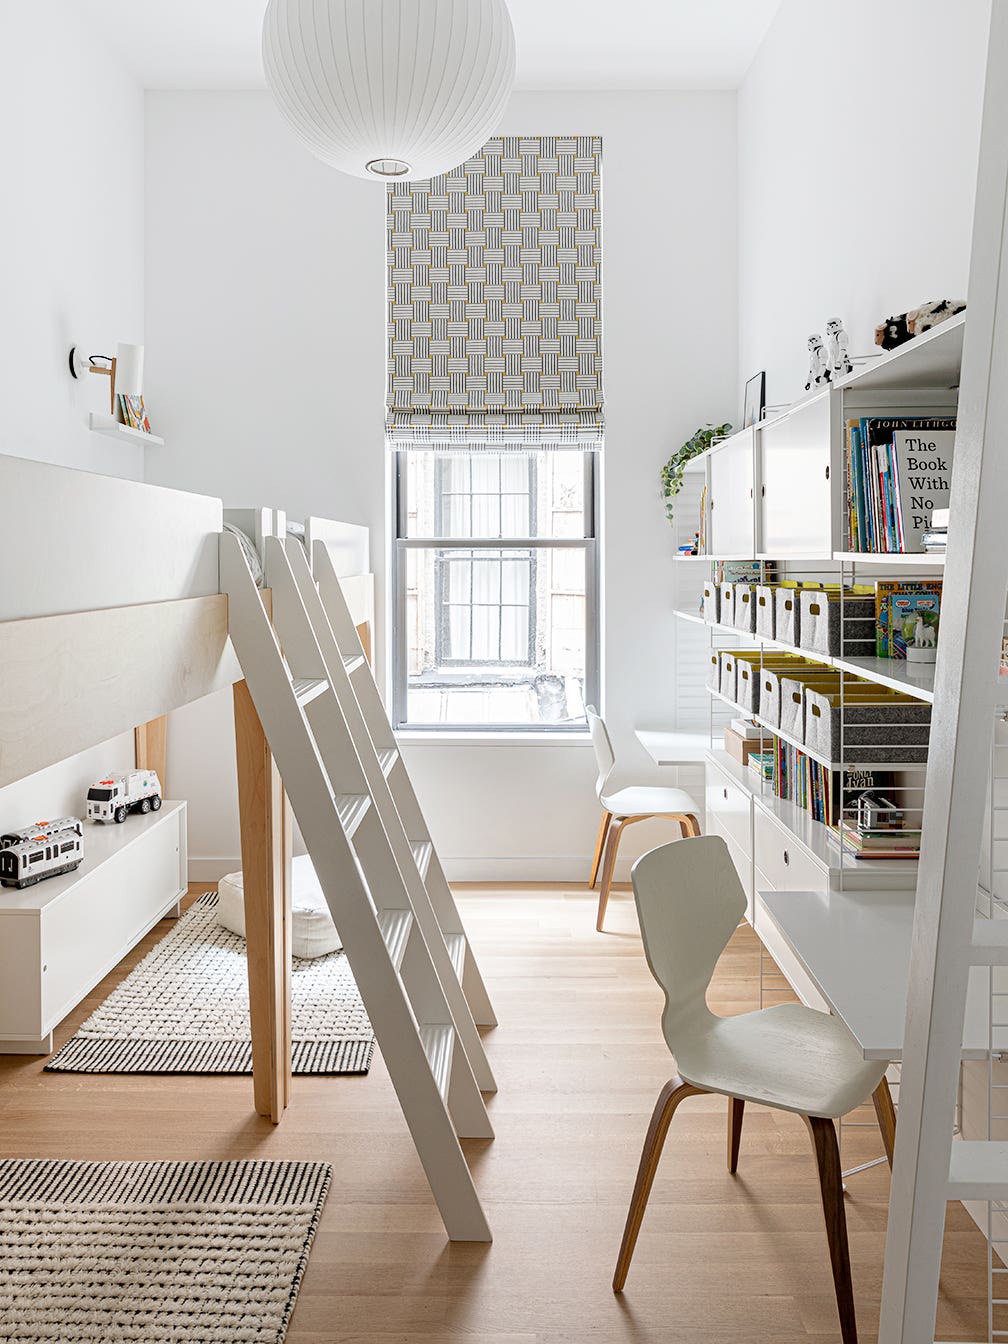 Swapping Bedrooms Created a Parents’ En Suite and a Double-Decker Play Space